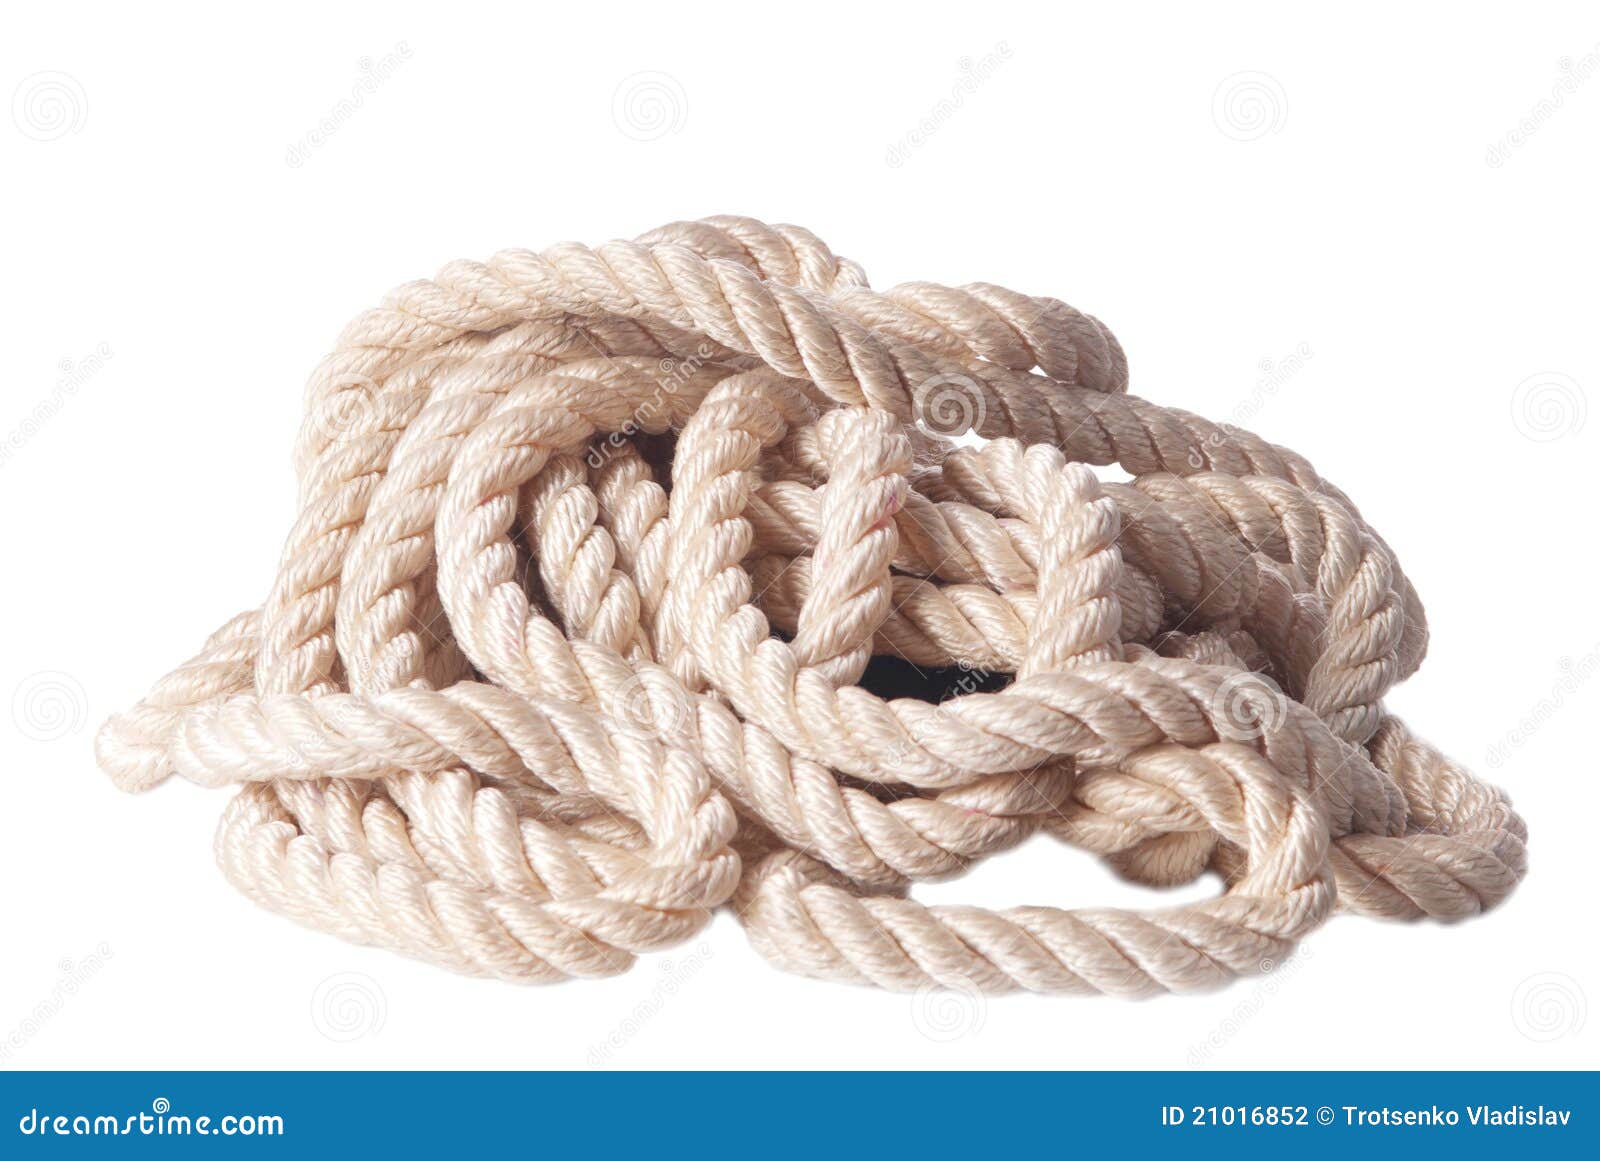 A thick rope stock photo. Image of background, white - 21016852